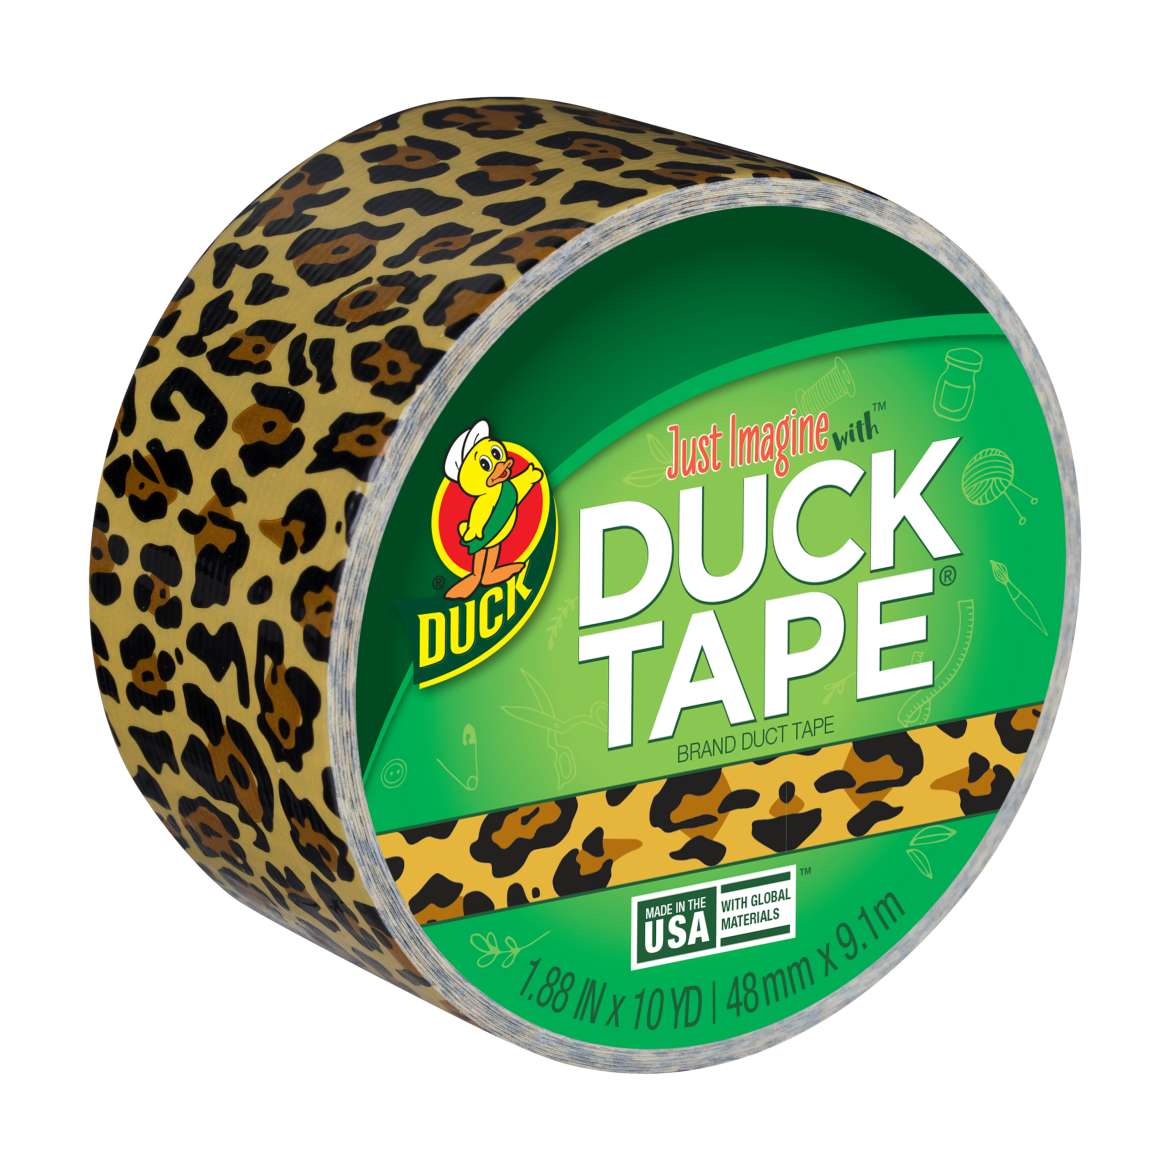 Printed Duck Tape® Brand Duct Tape - Leopard Print, 1.88 in. x 10 yd.